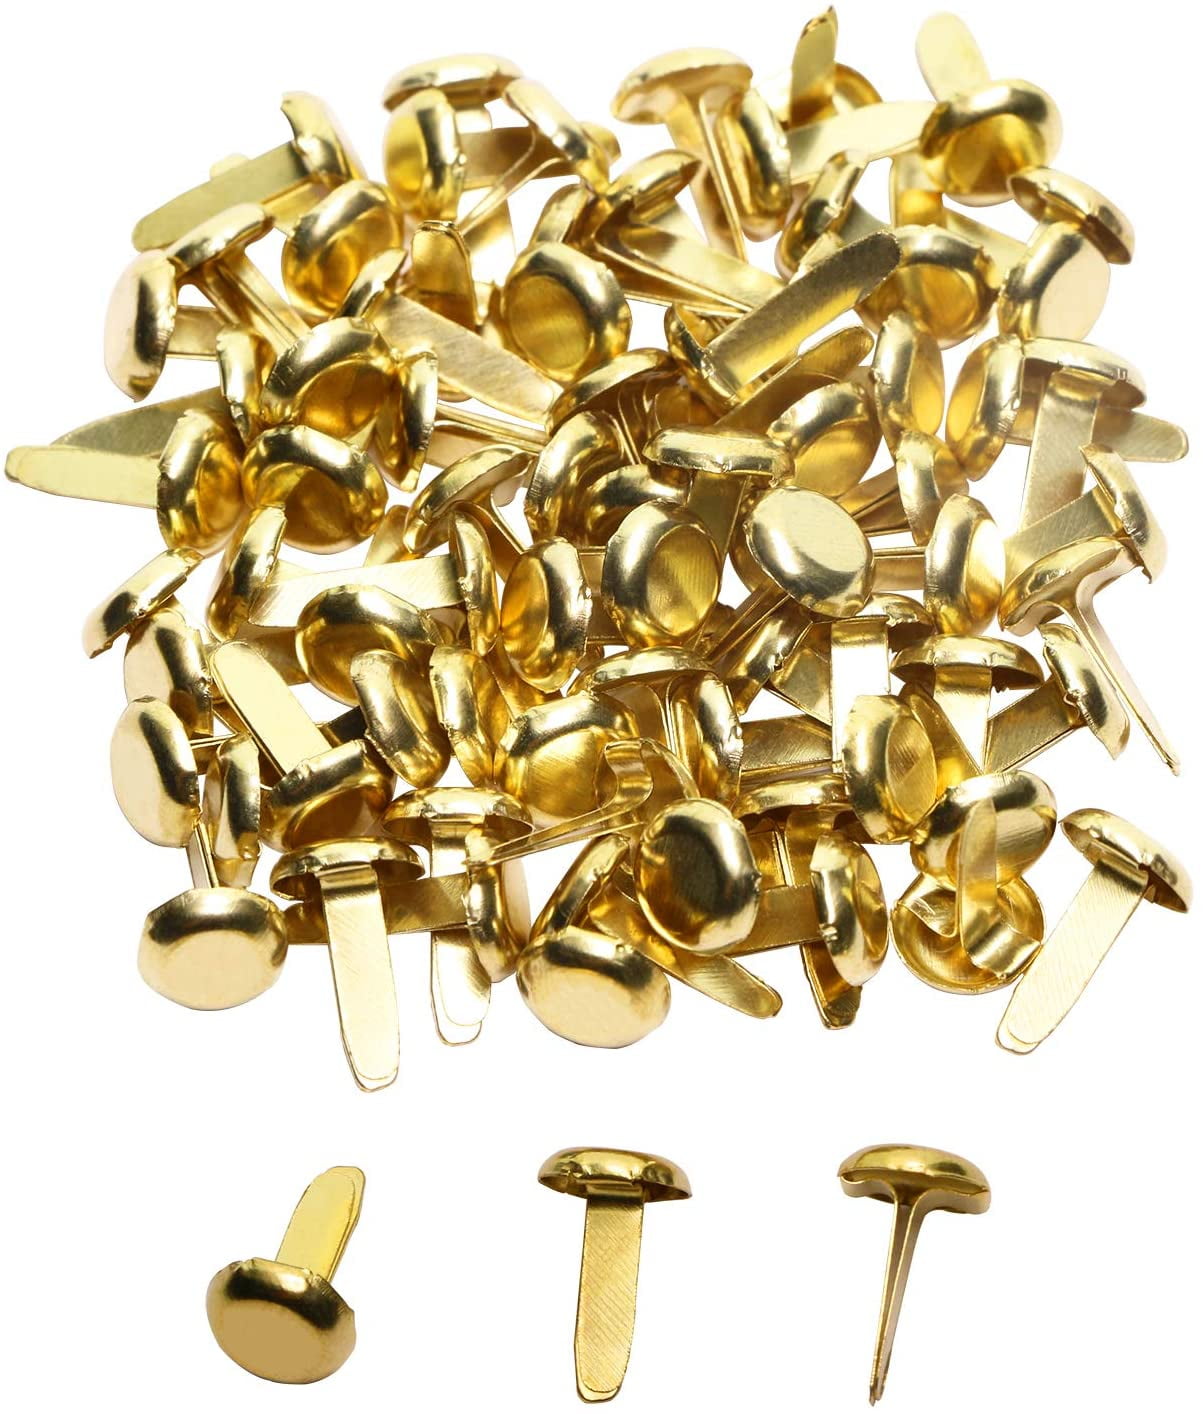  Therwen 1500 Pcs Paper Fasteners for Crafts Gold Brads